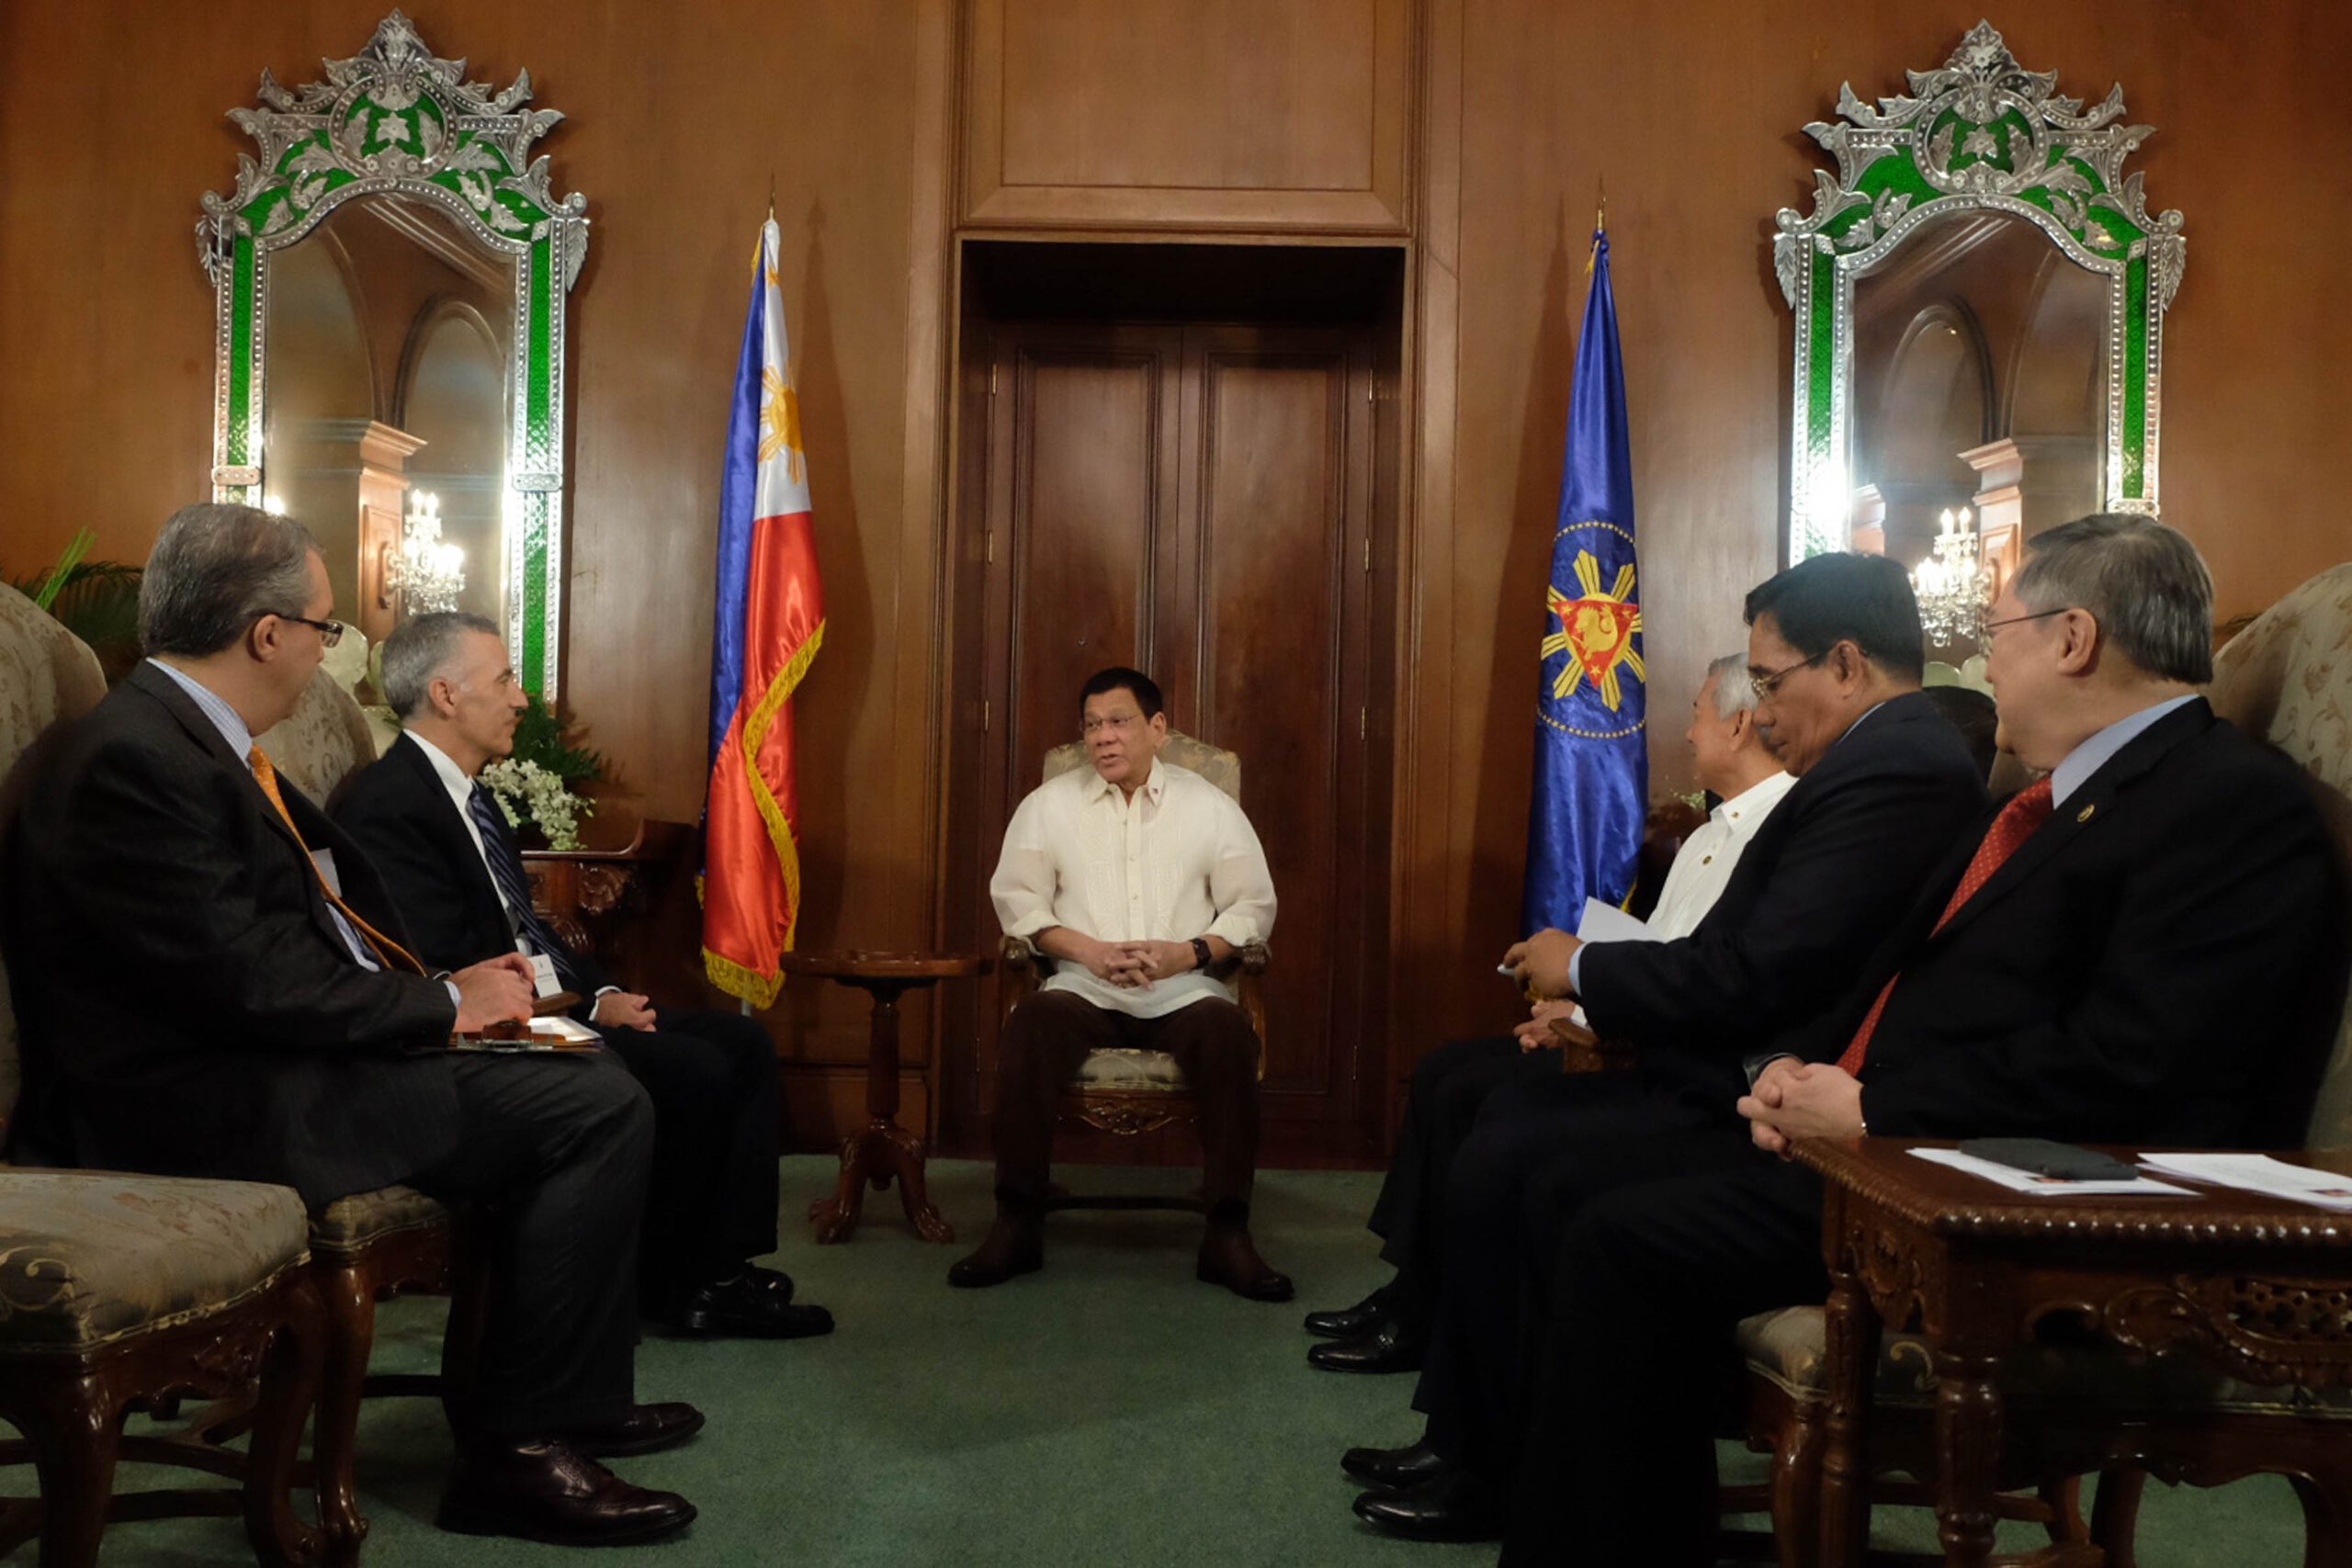 Duterte and US officials discuss West Philippine Sea ruling